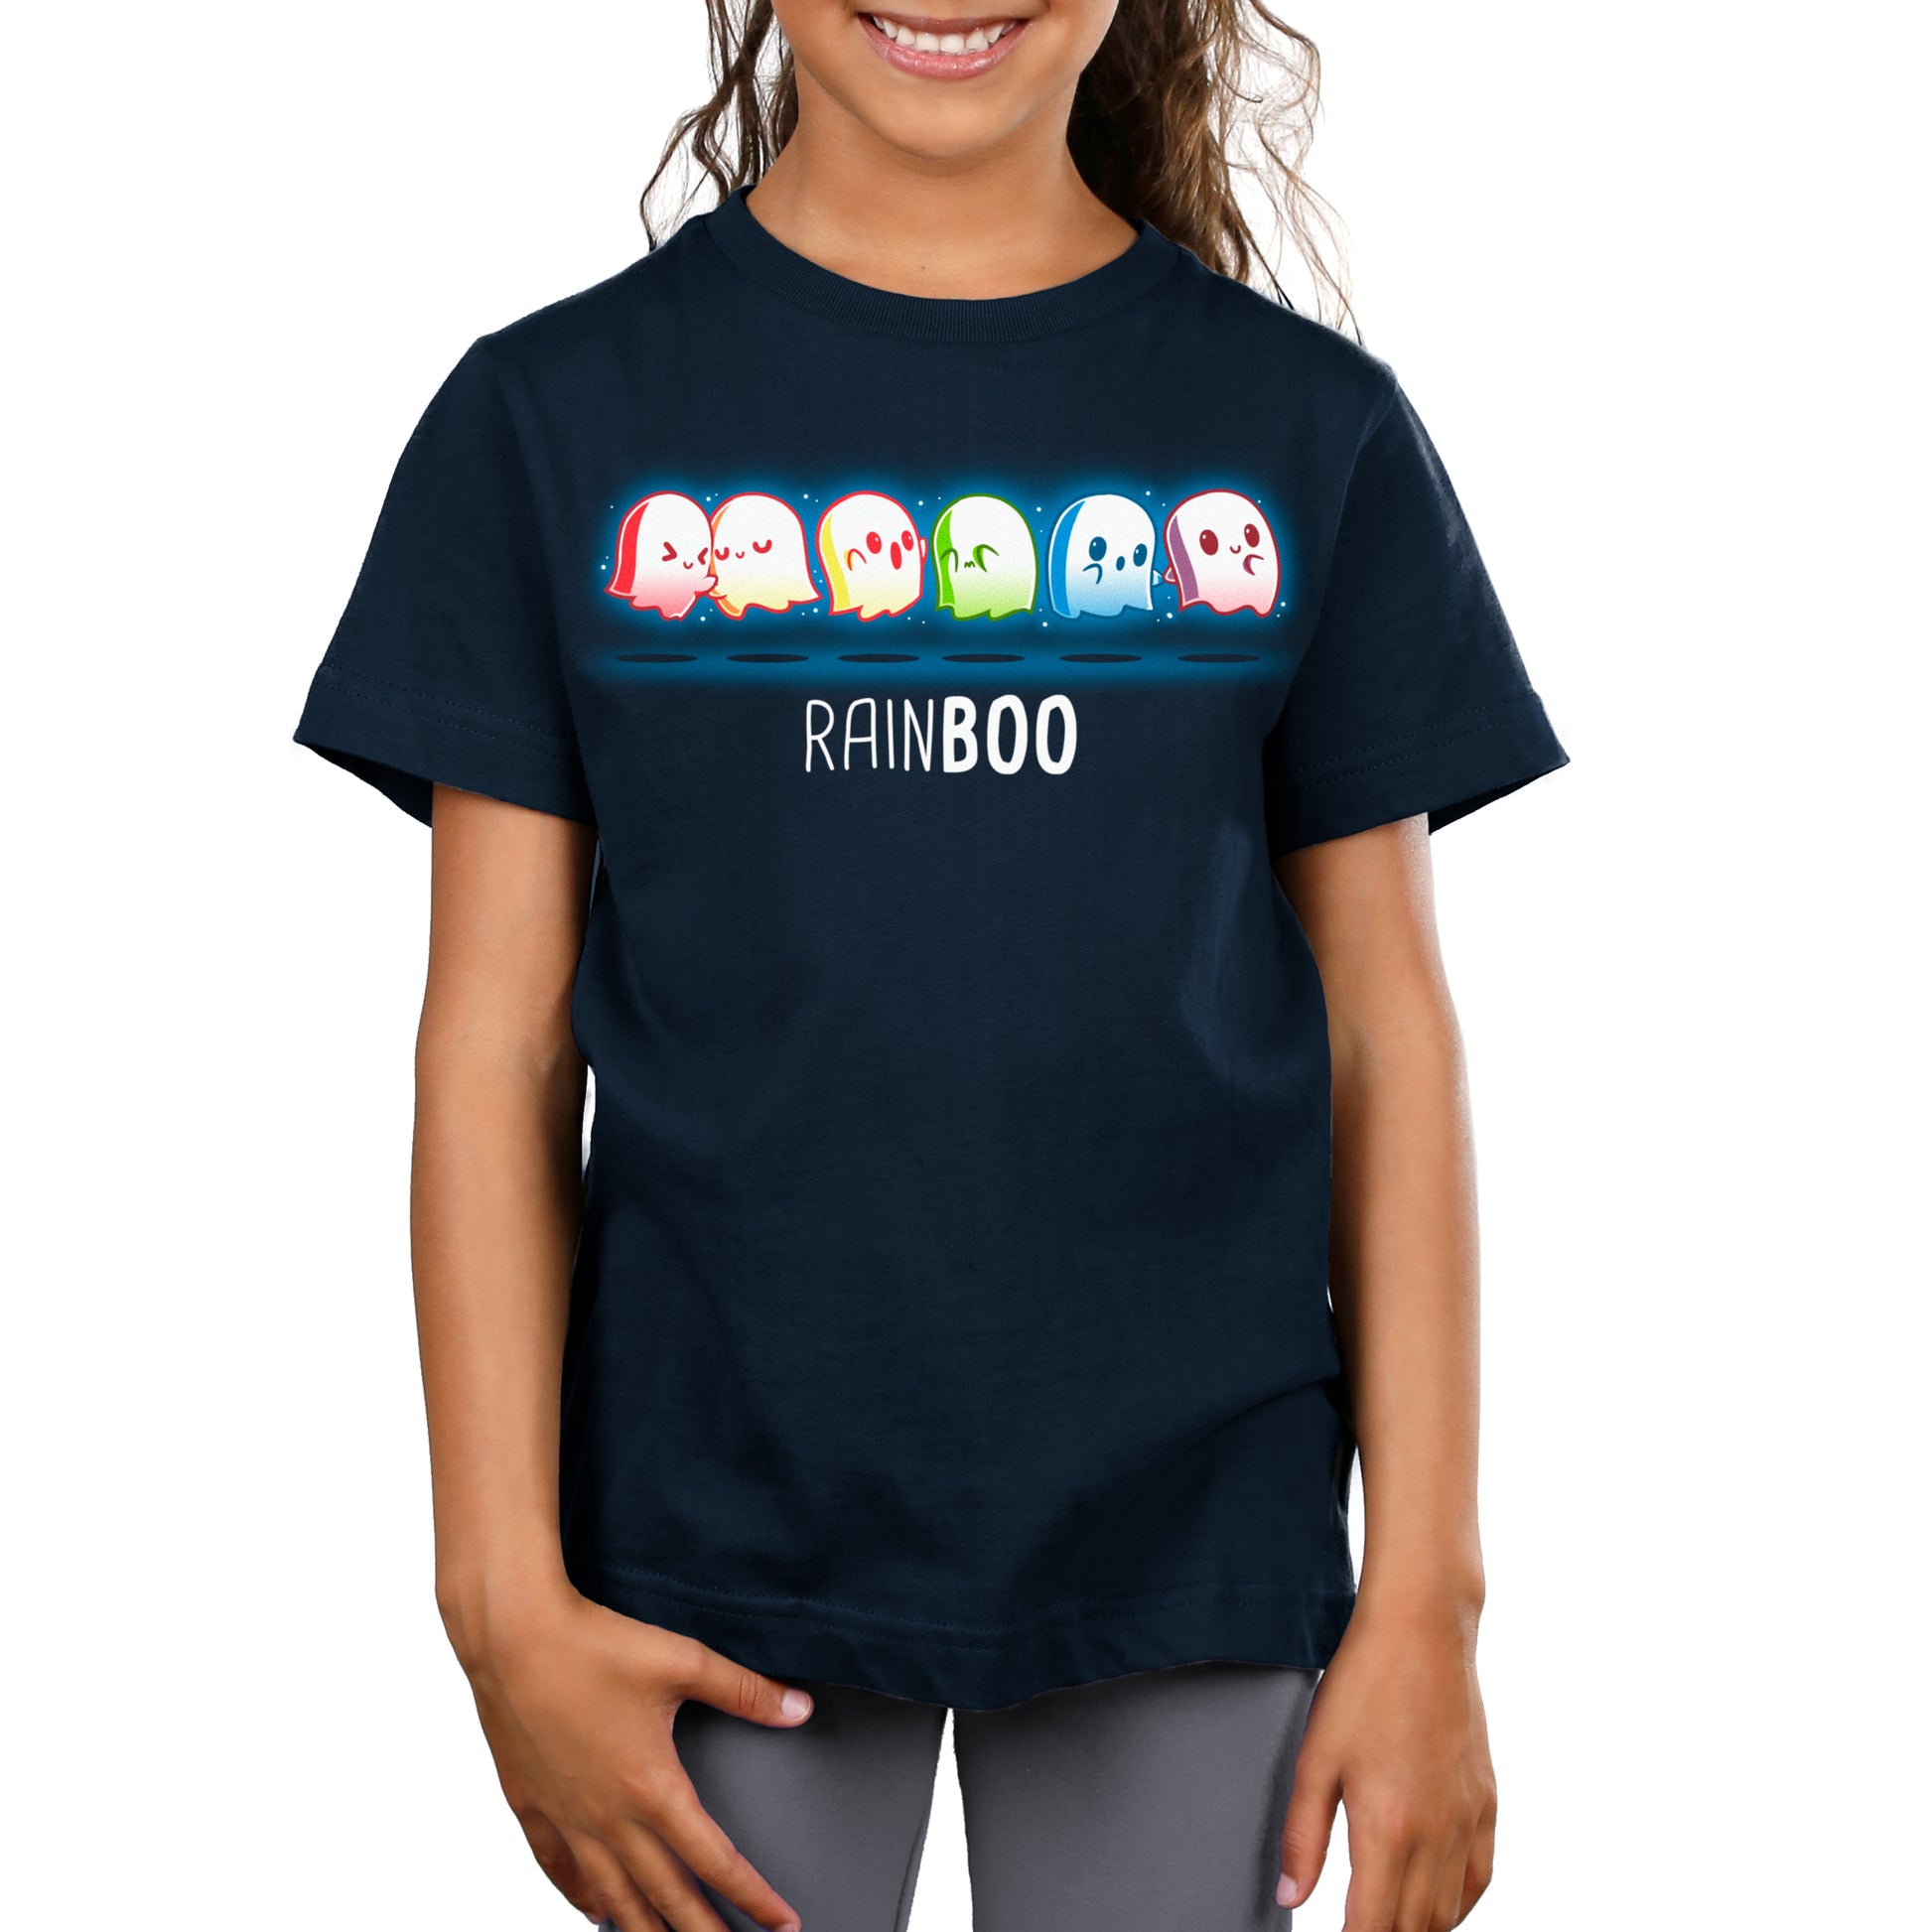 A girl wearing a black t-shirt with the TeeTurtle logo and the word "Rainboo" written on it.